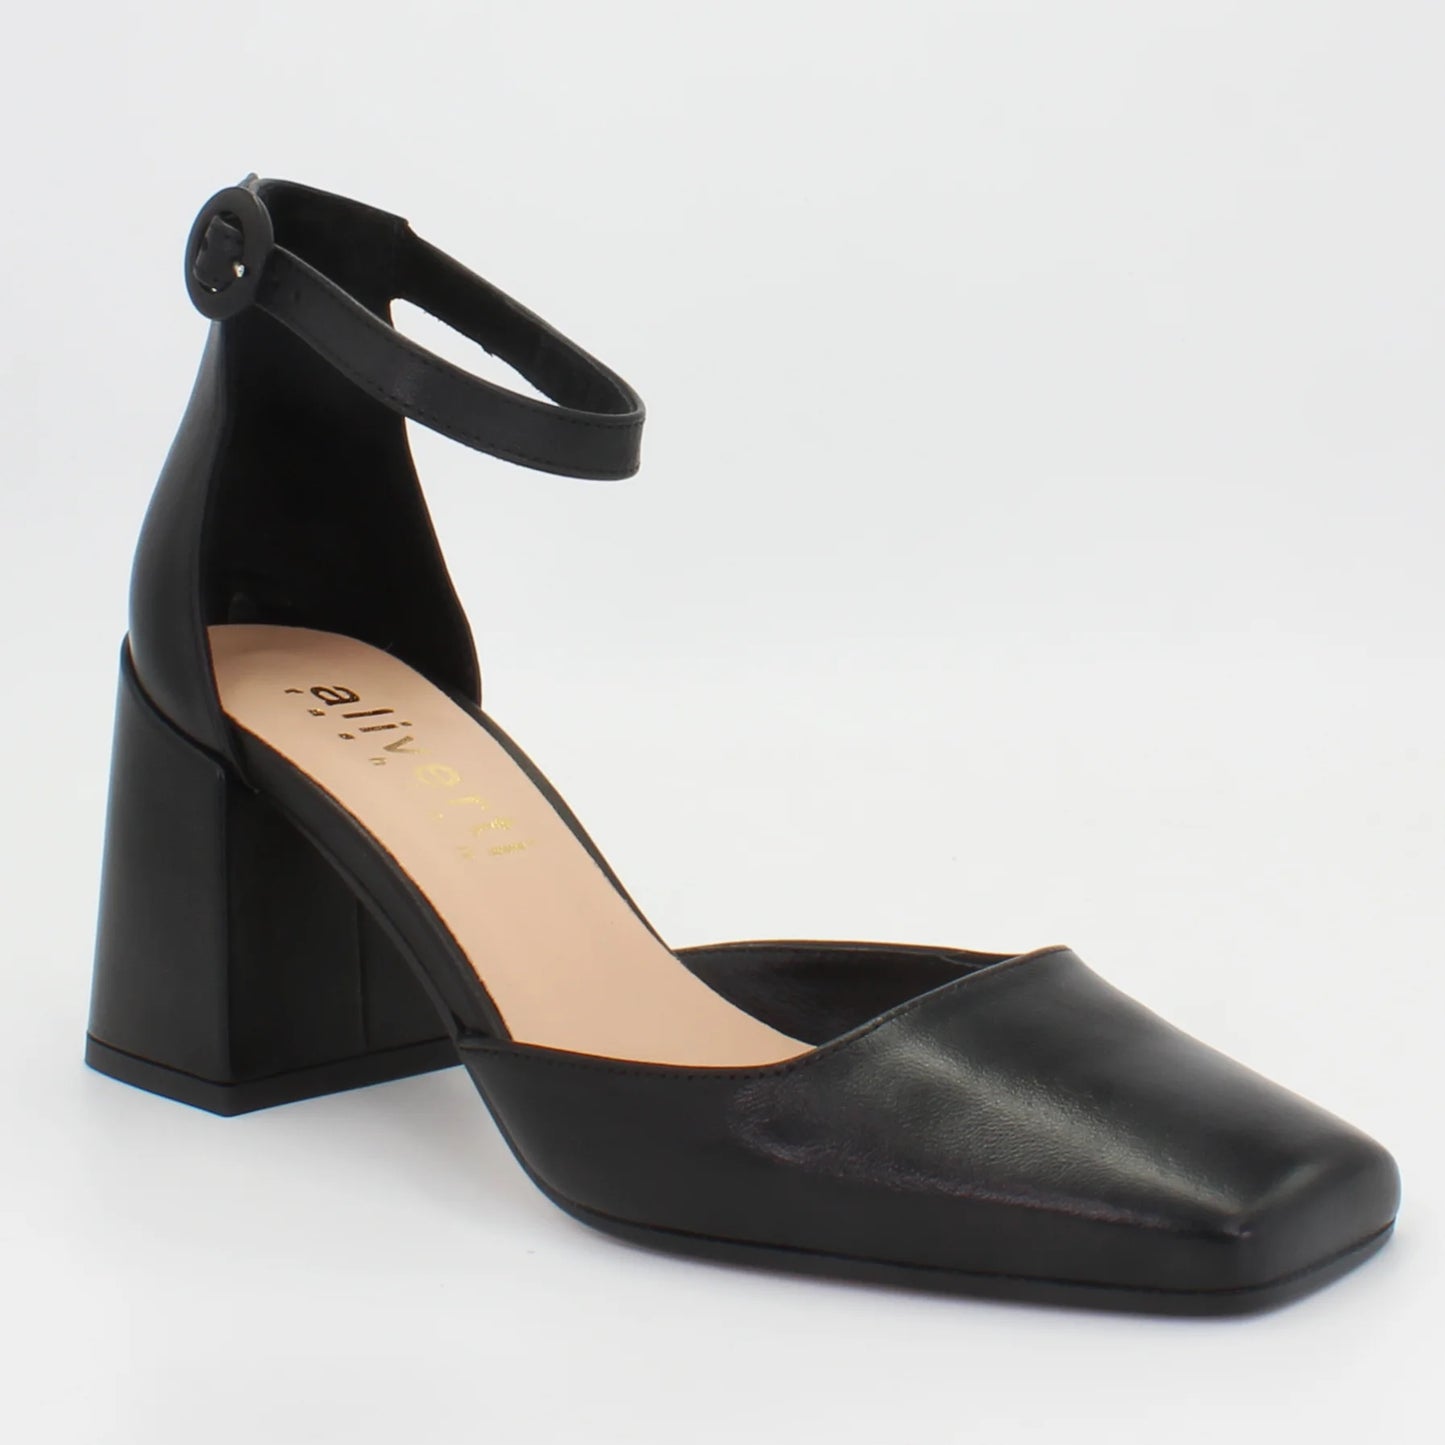 Shop Handmade Italian Leather block heel in nero nappa (SACHA7) or browse our range of hand-made Italian shoes in leather or suede in-store at Aliverti Cape Town, or shop online. We deliver in South Africa & offer multiple payment plans as well as accept multiple safe & secure payment methods.